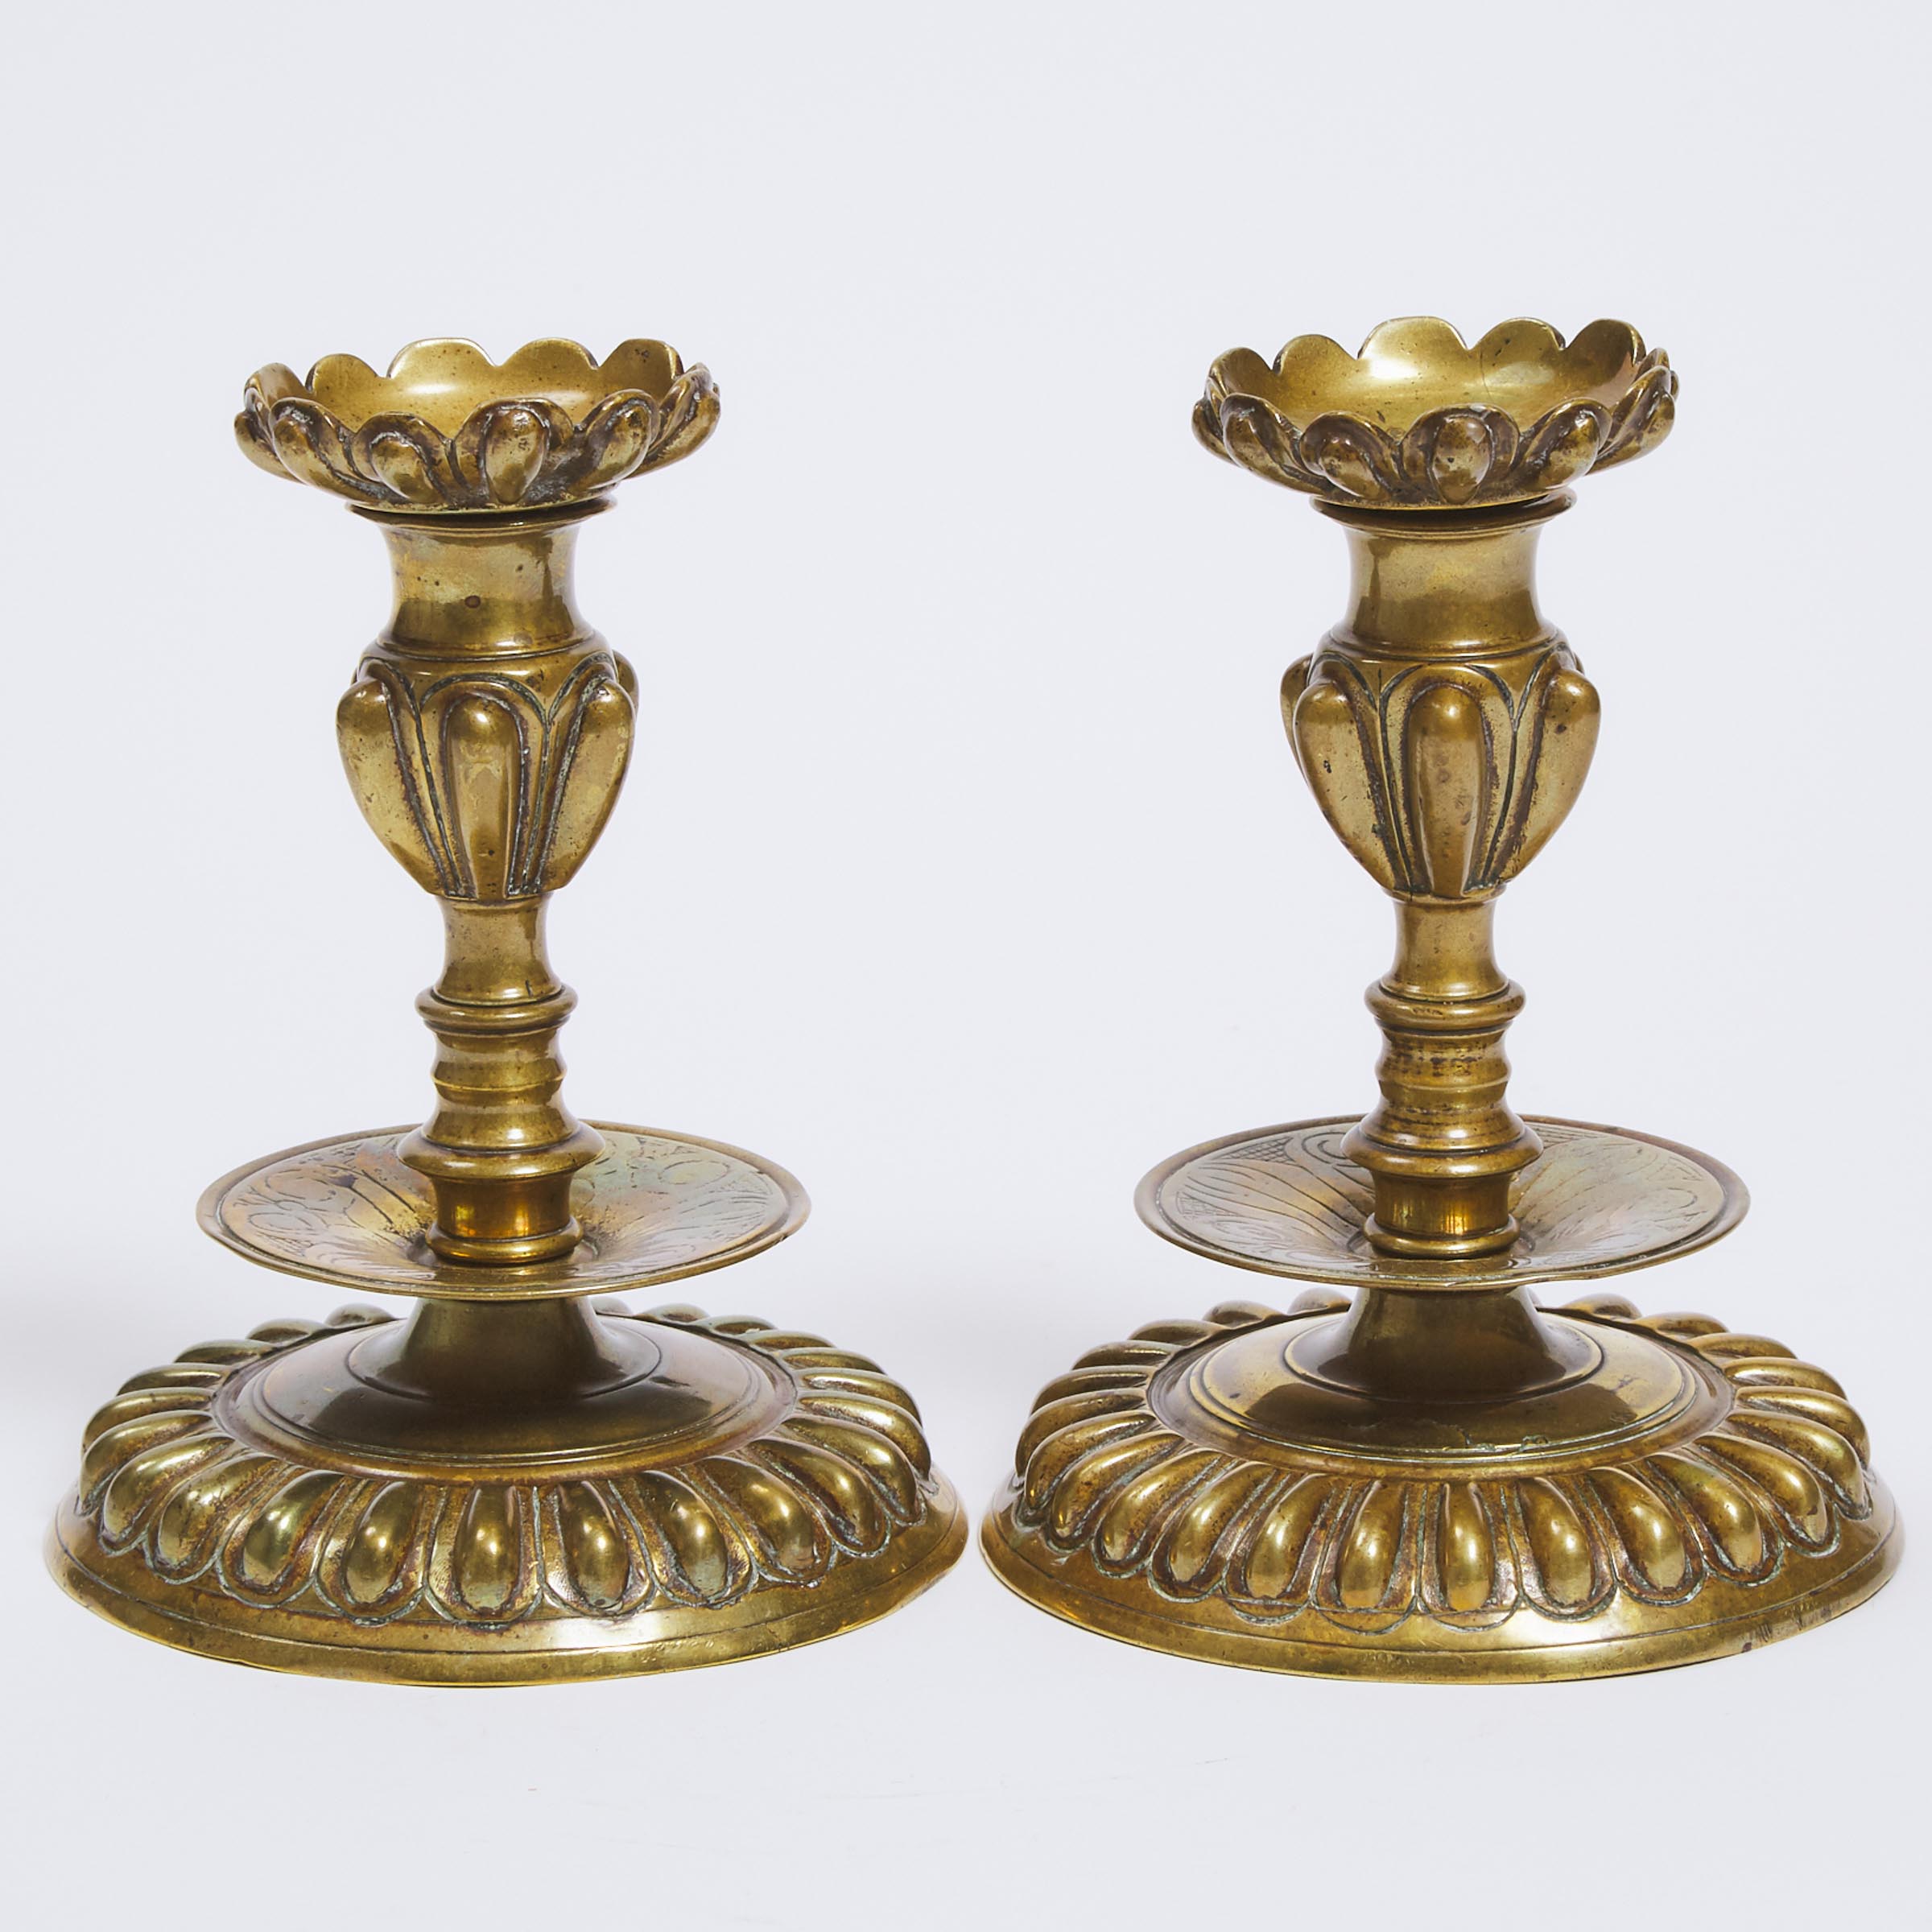 Pair of Italian Bronze Candlesticks, late 17th/early 18 century